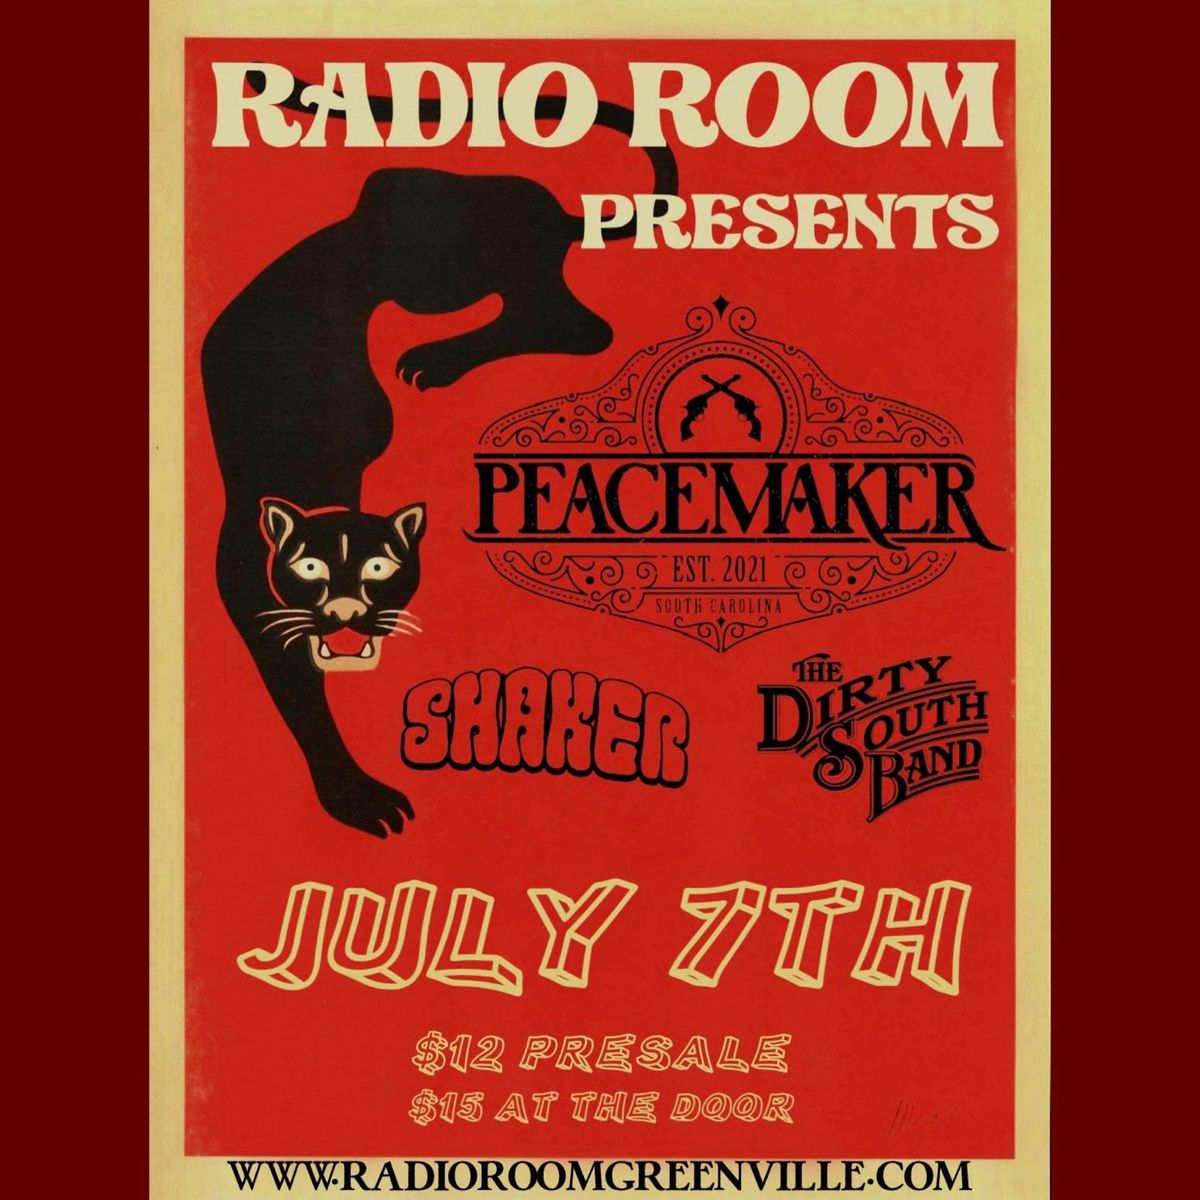 Radio Room Presents: Peacemaker with Shaker and The "Dirty South" Band at Doc's Tavern